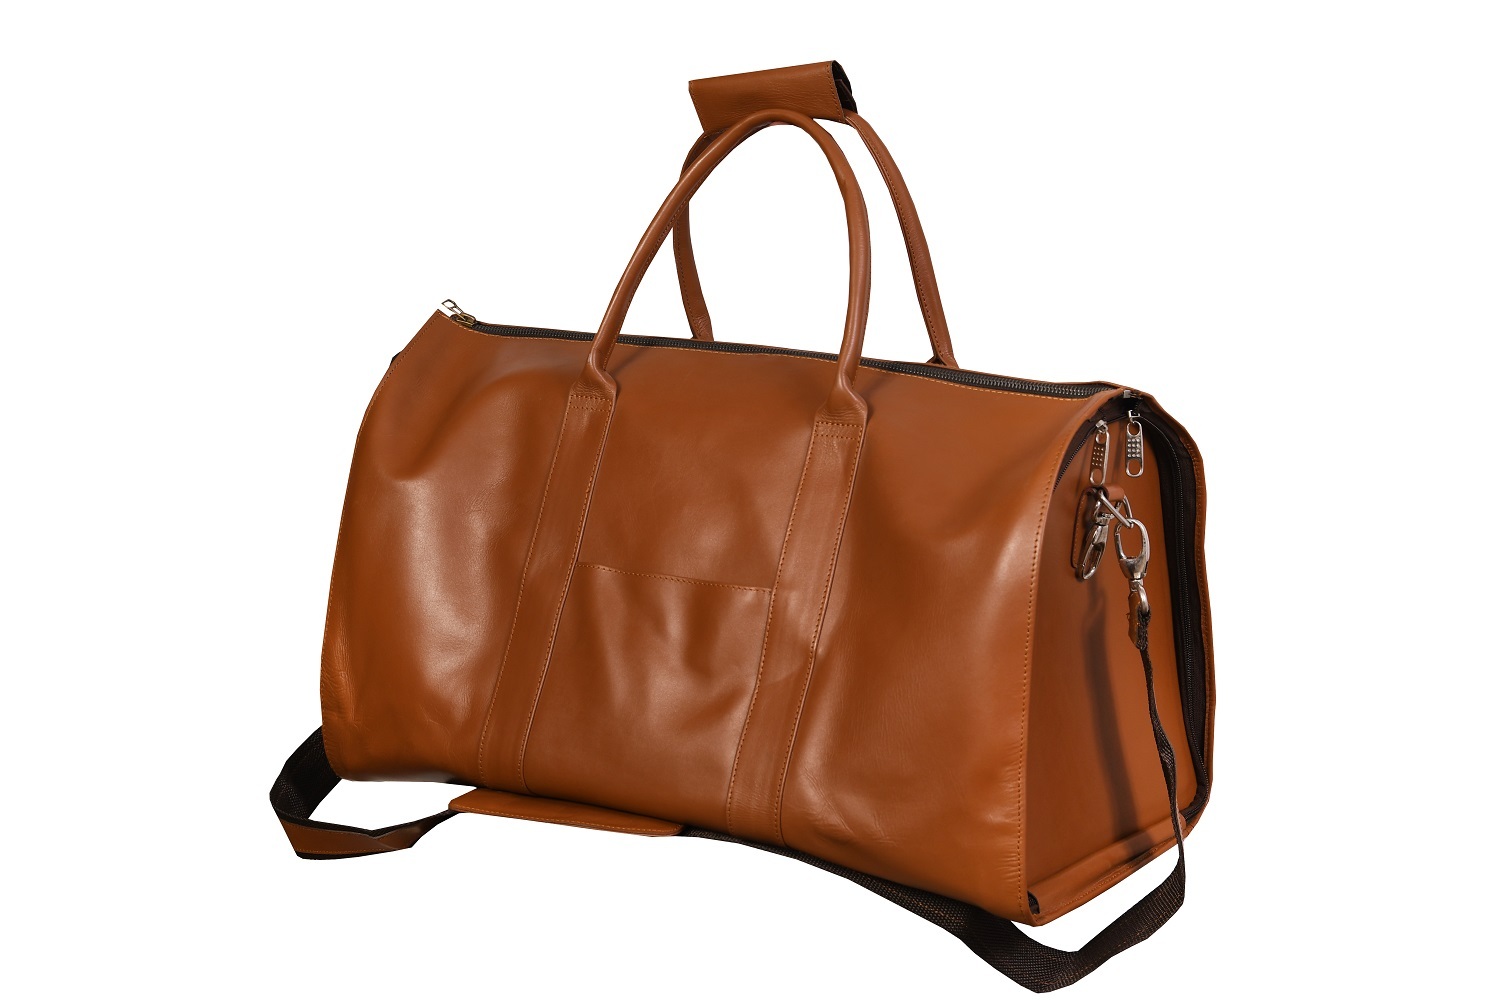 Primary image for Handmade Toiletry Tawny Tool Kit Leather Bag, Hanging Case Travel Luggage Bag,